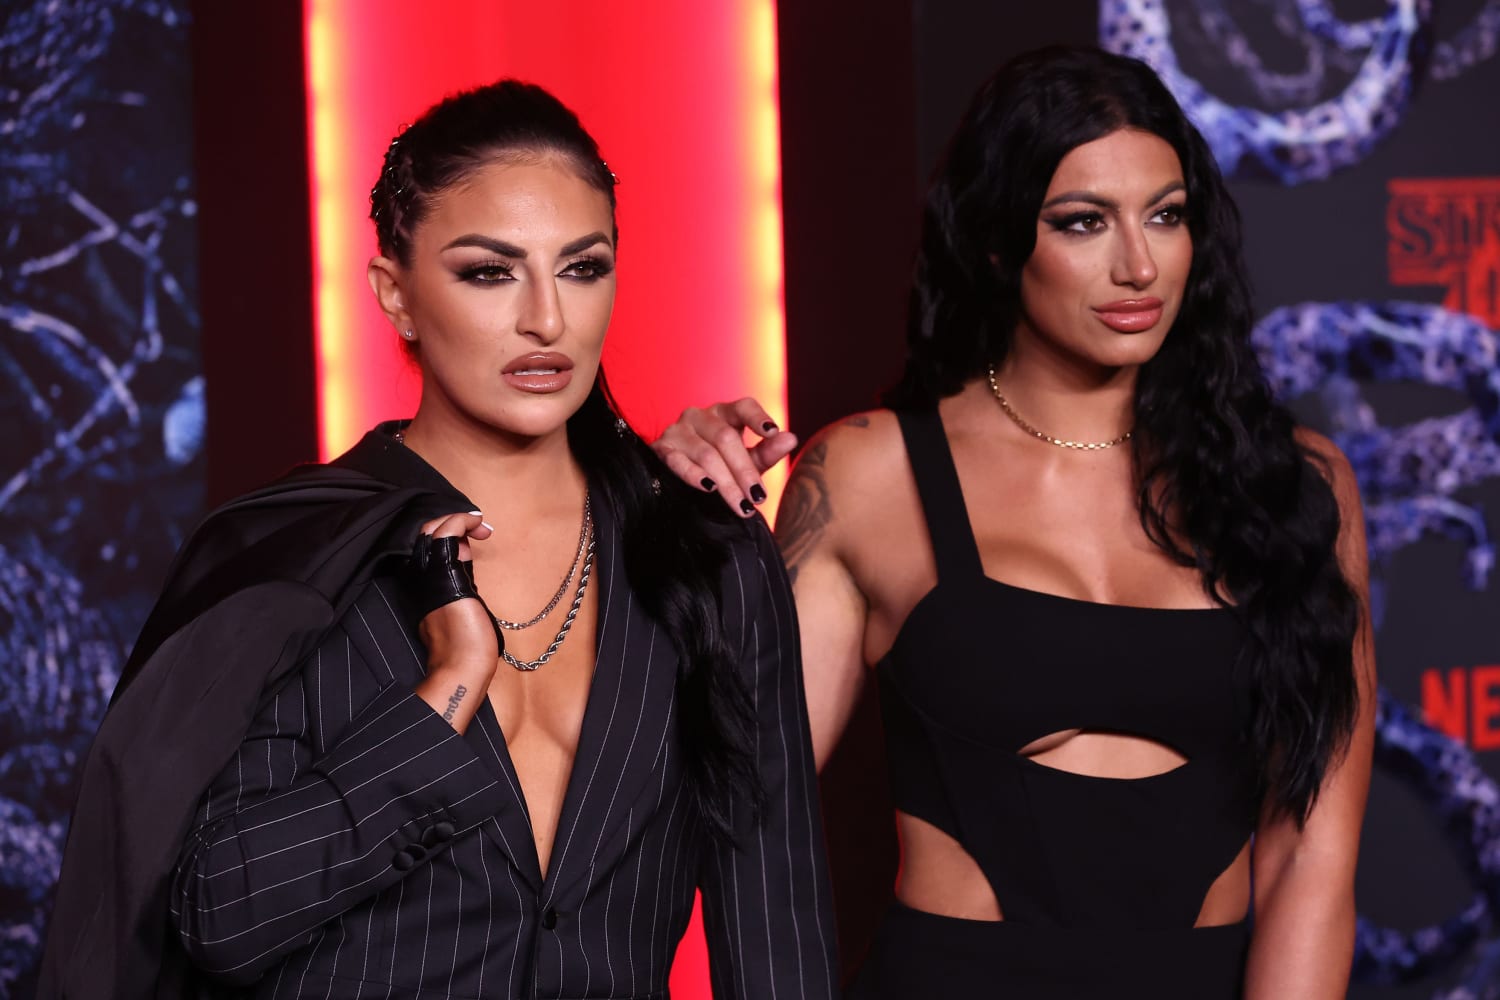 Sonya Deville — 1st openly gay female WWE wrestler — on her decision to come out on national TV photo